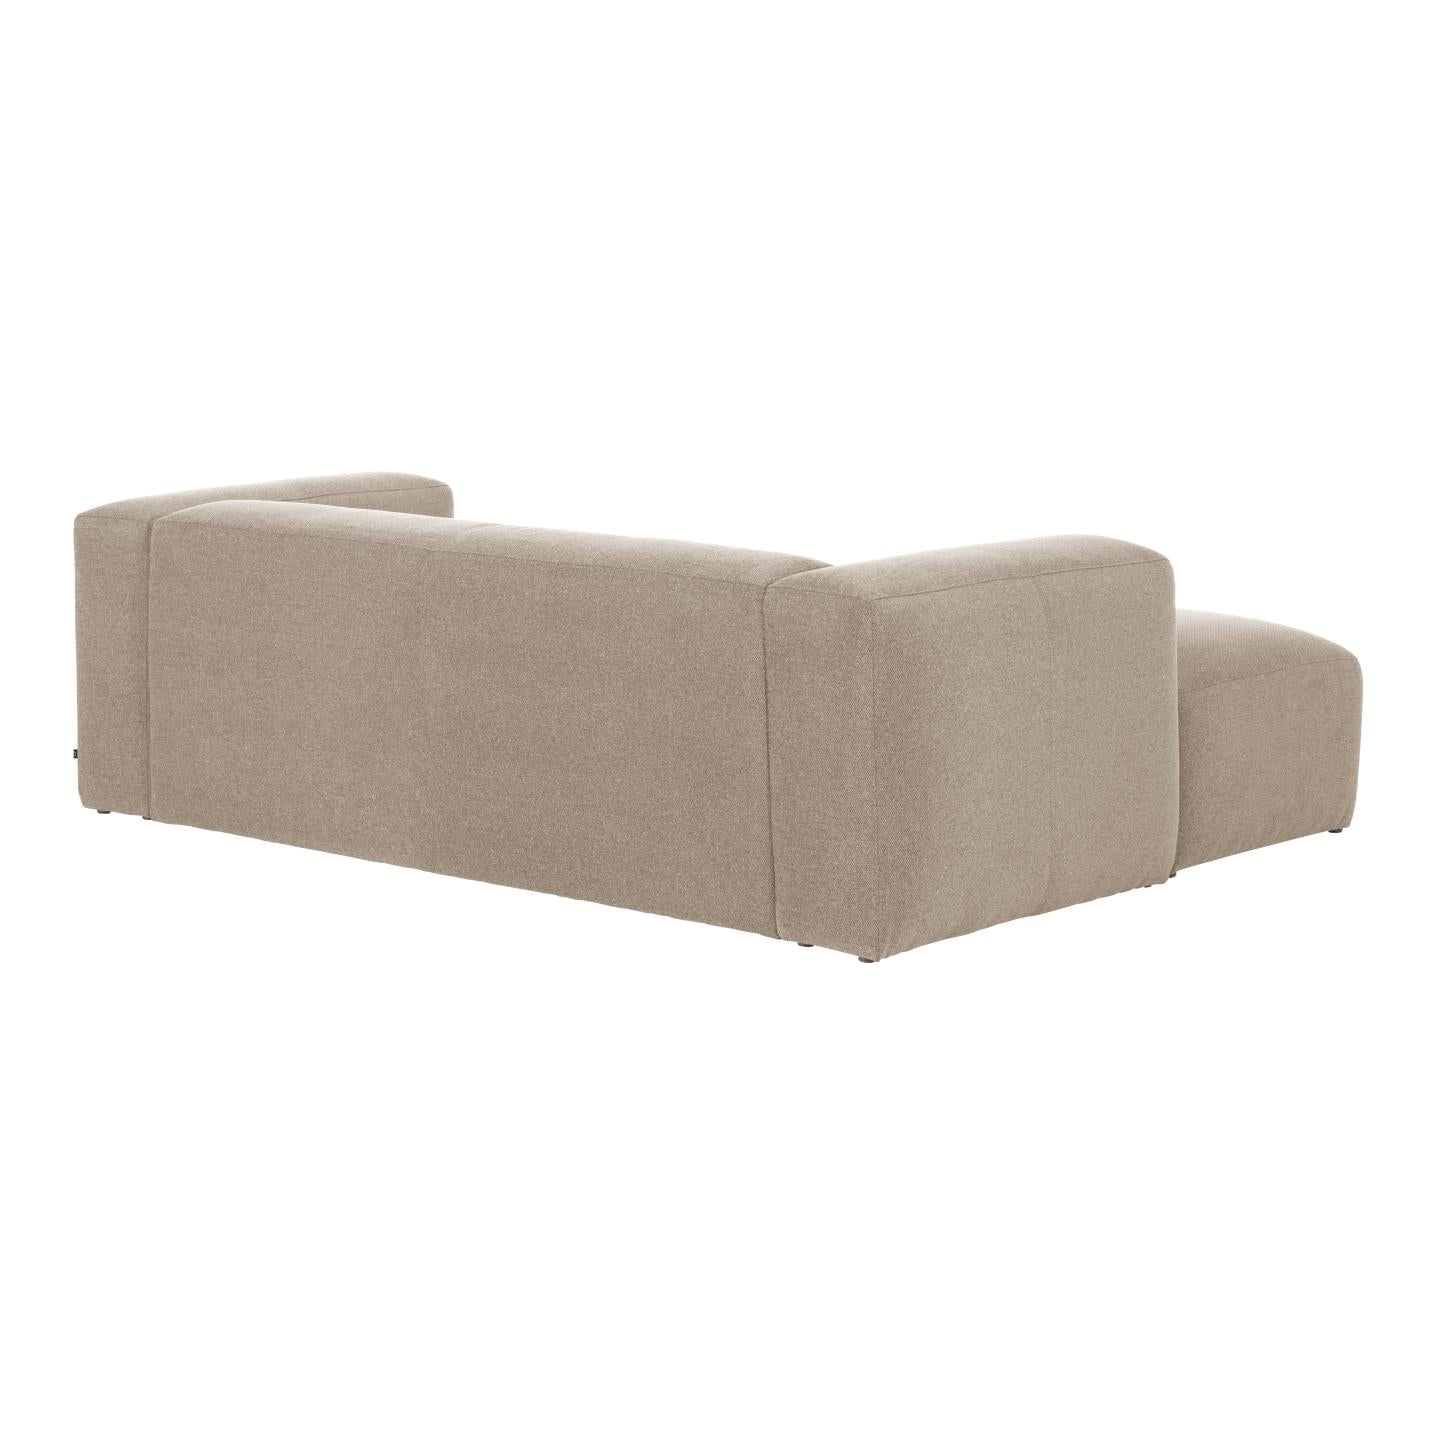 Blok 2 seater sofa with left-hand chaise longue in beige, 240 cm